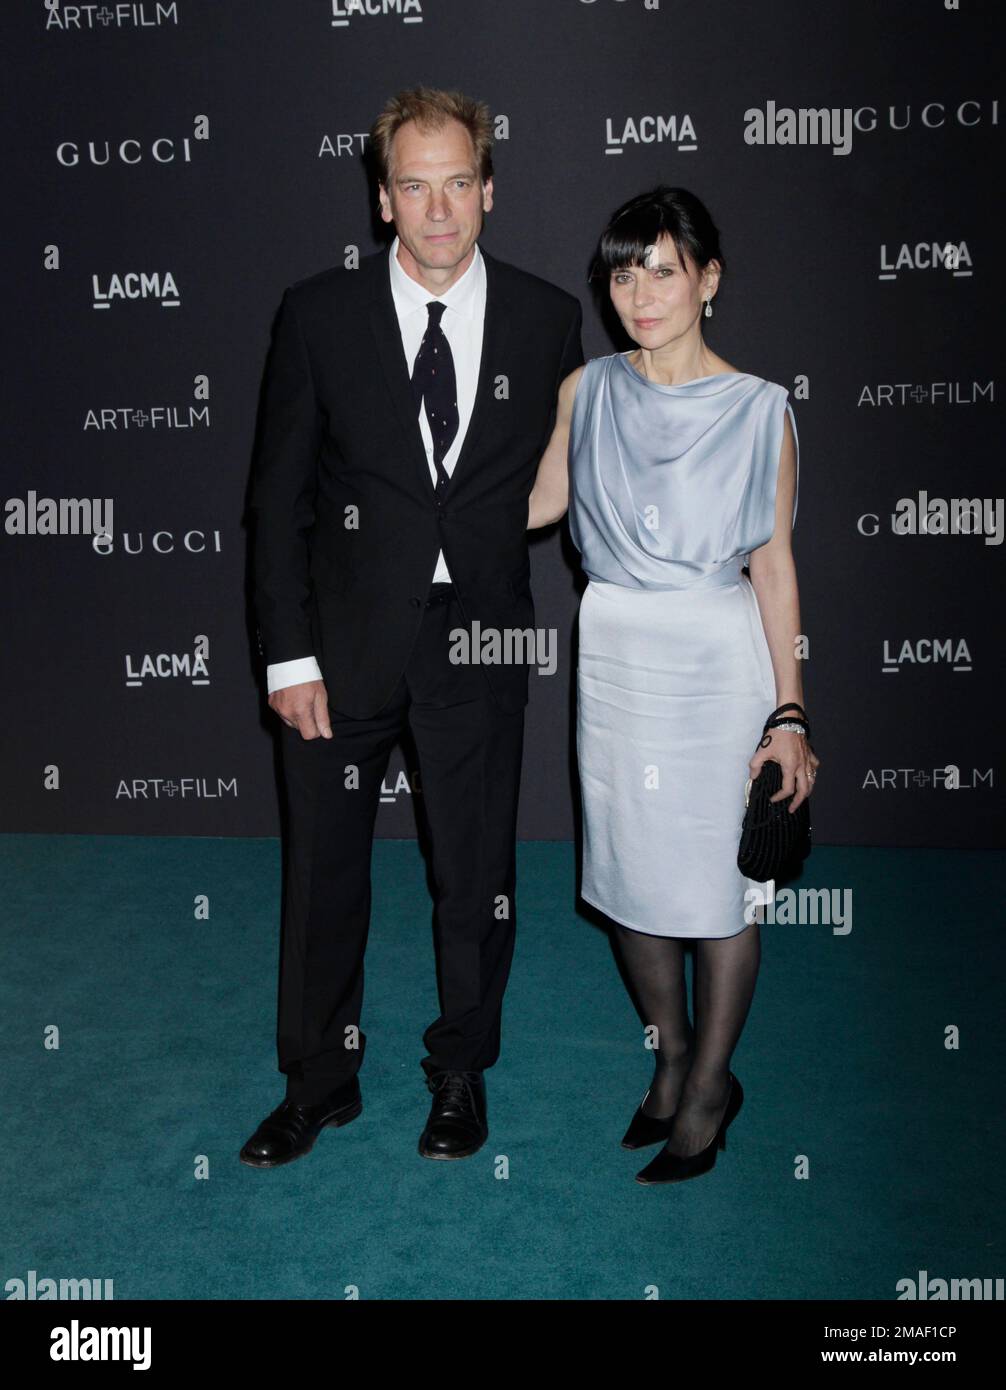 Actor Julian Sands (L) and his wife, Evgenia Citkowitz arrive at the LACMA 2015 Art+Film Gala at LACMA on November 7, 2015 in Los Angeles, California. Photo by Francis Specker Stock Photo